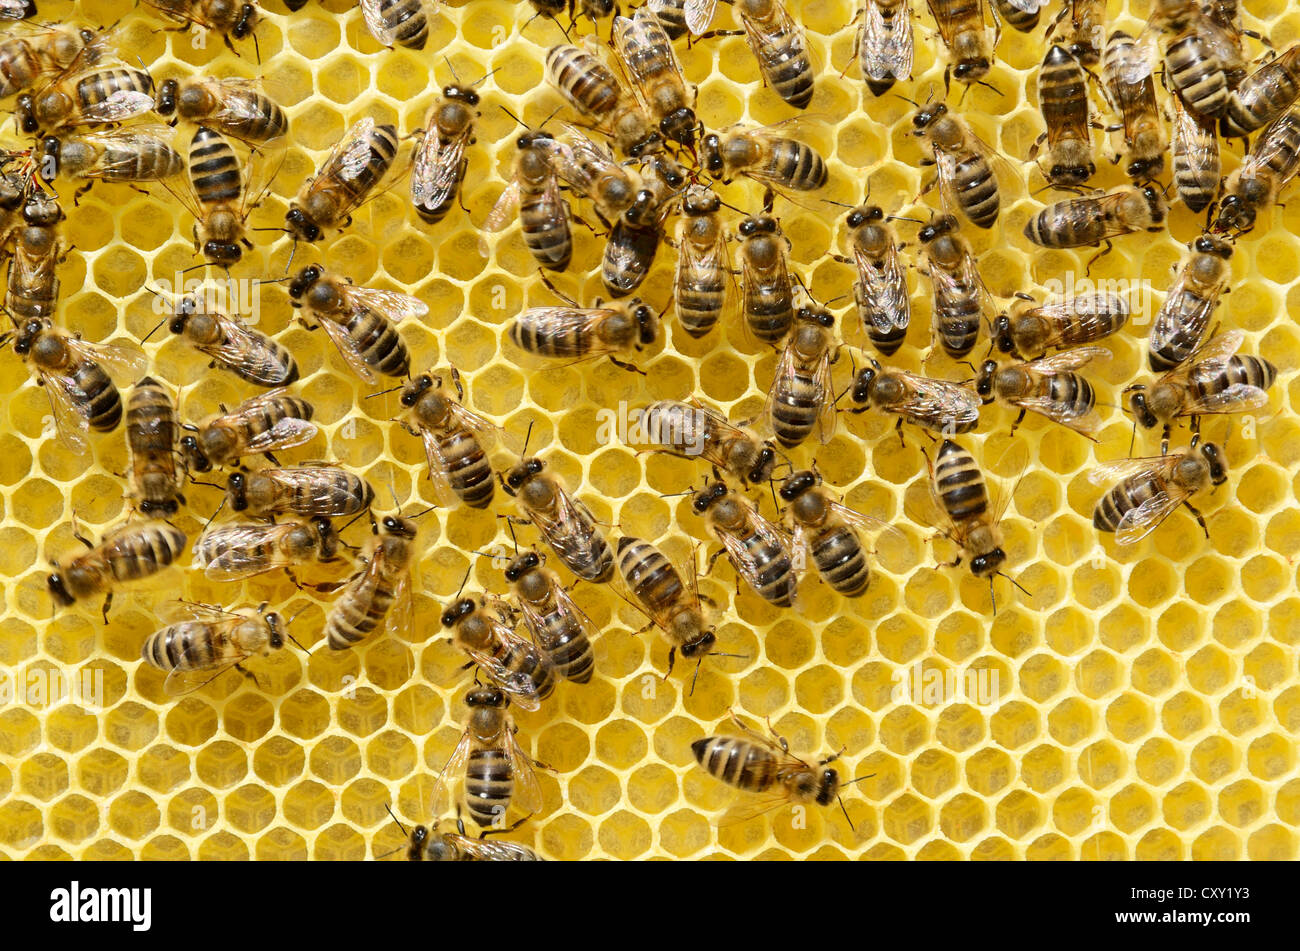 Newly developed honeycomb with worker bees (Apis mellifera var. carnica) Stock Photo